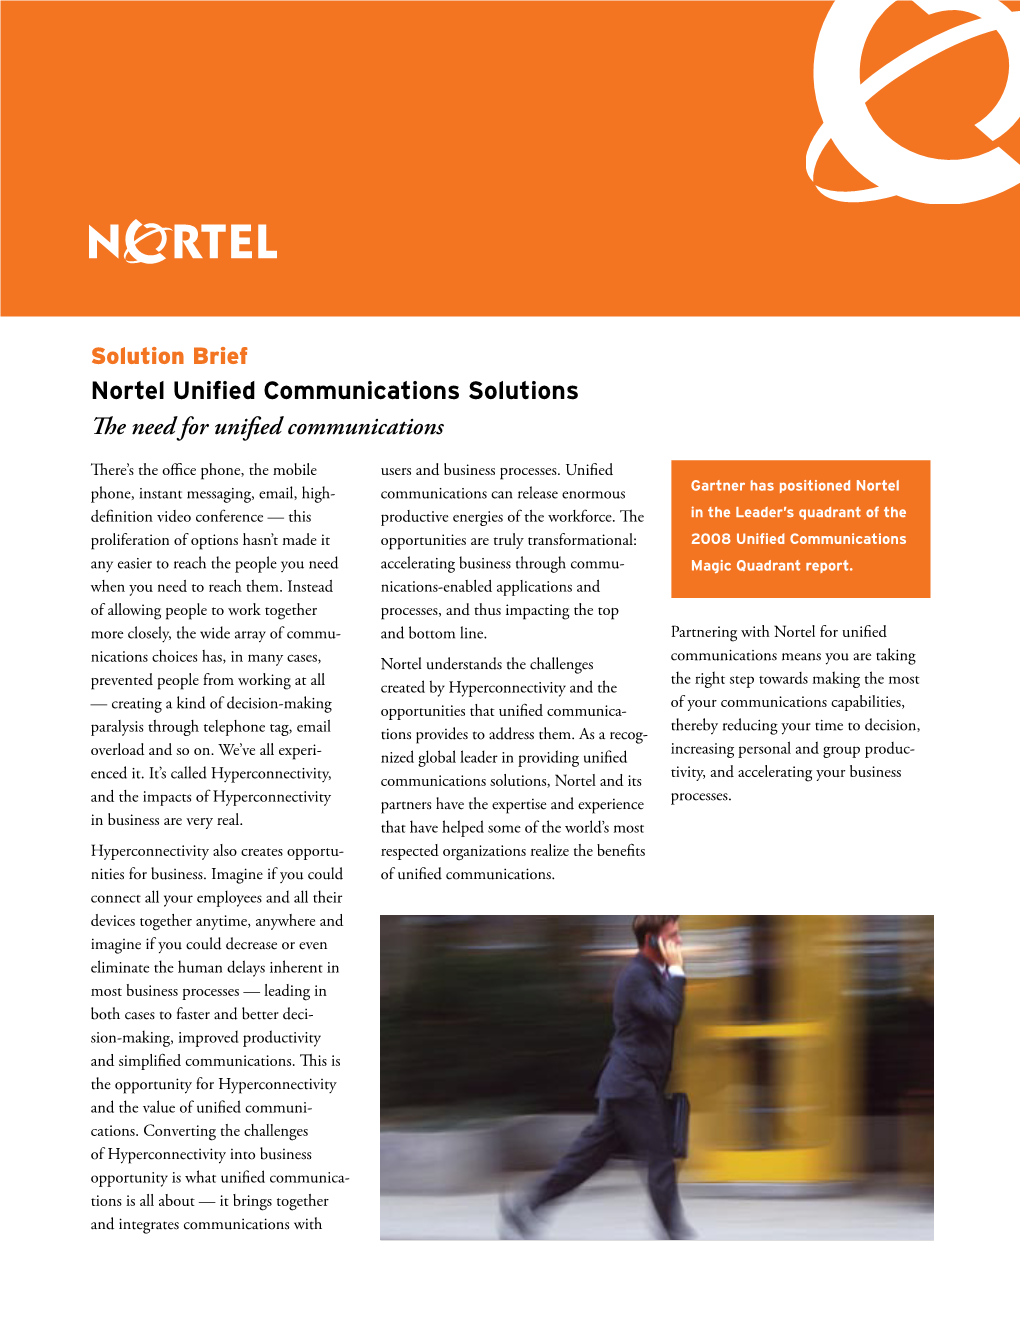 Nortel Unified Communications Solutions the Need for Unified Communications